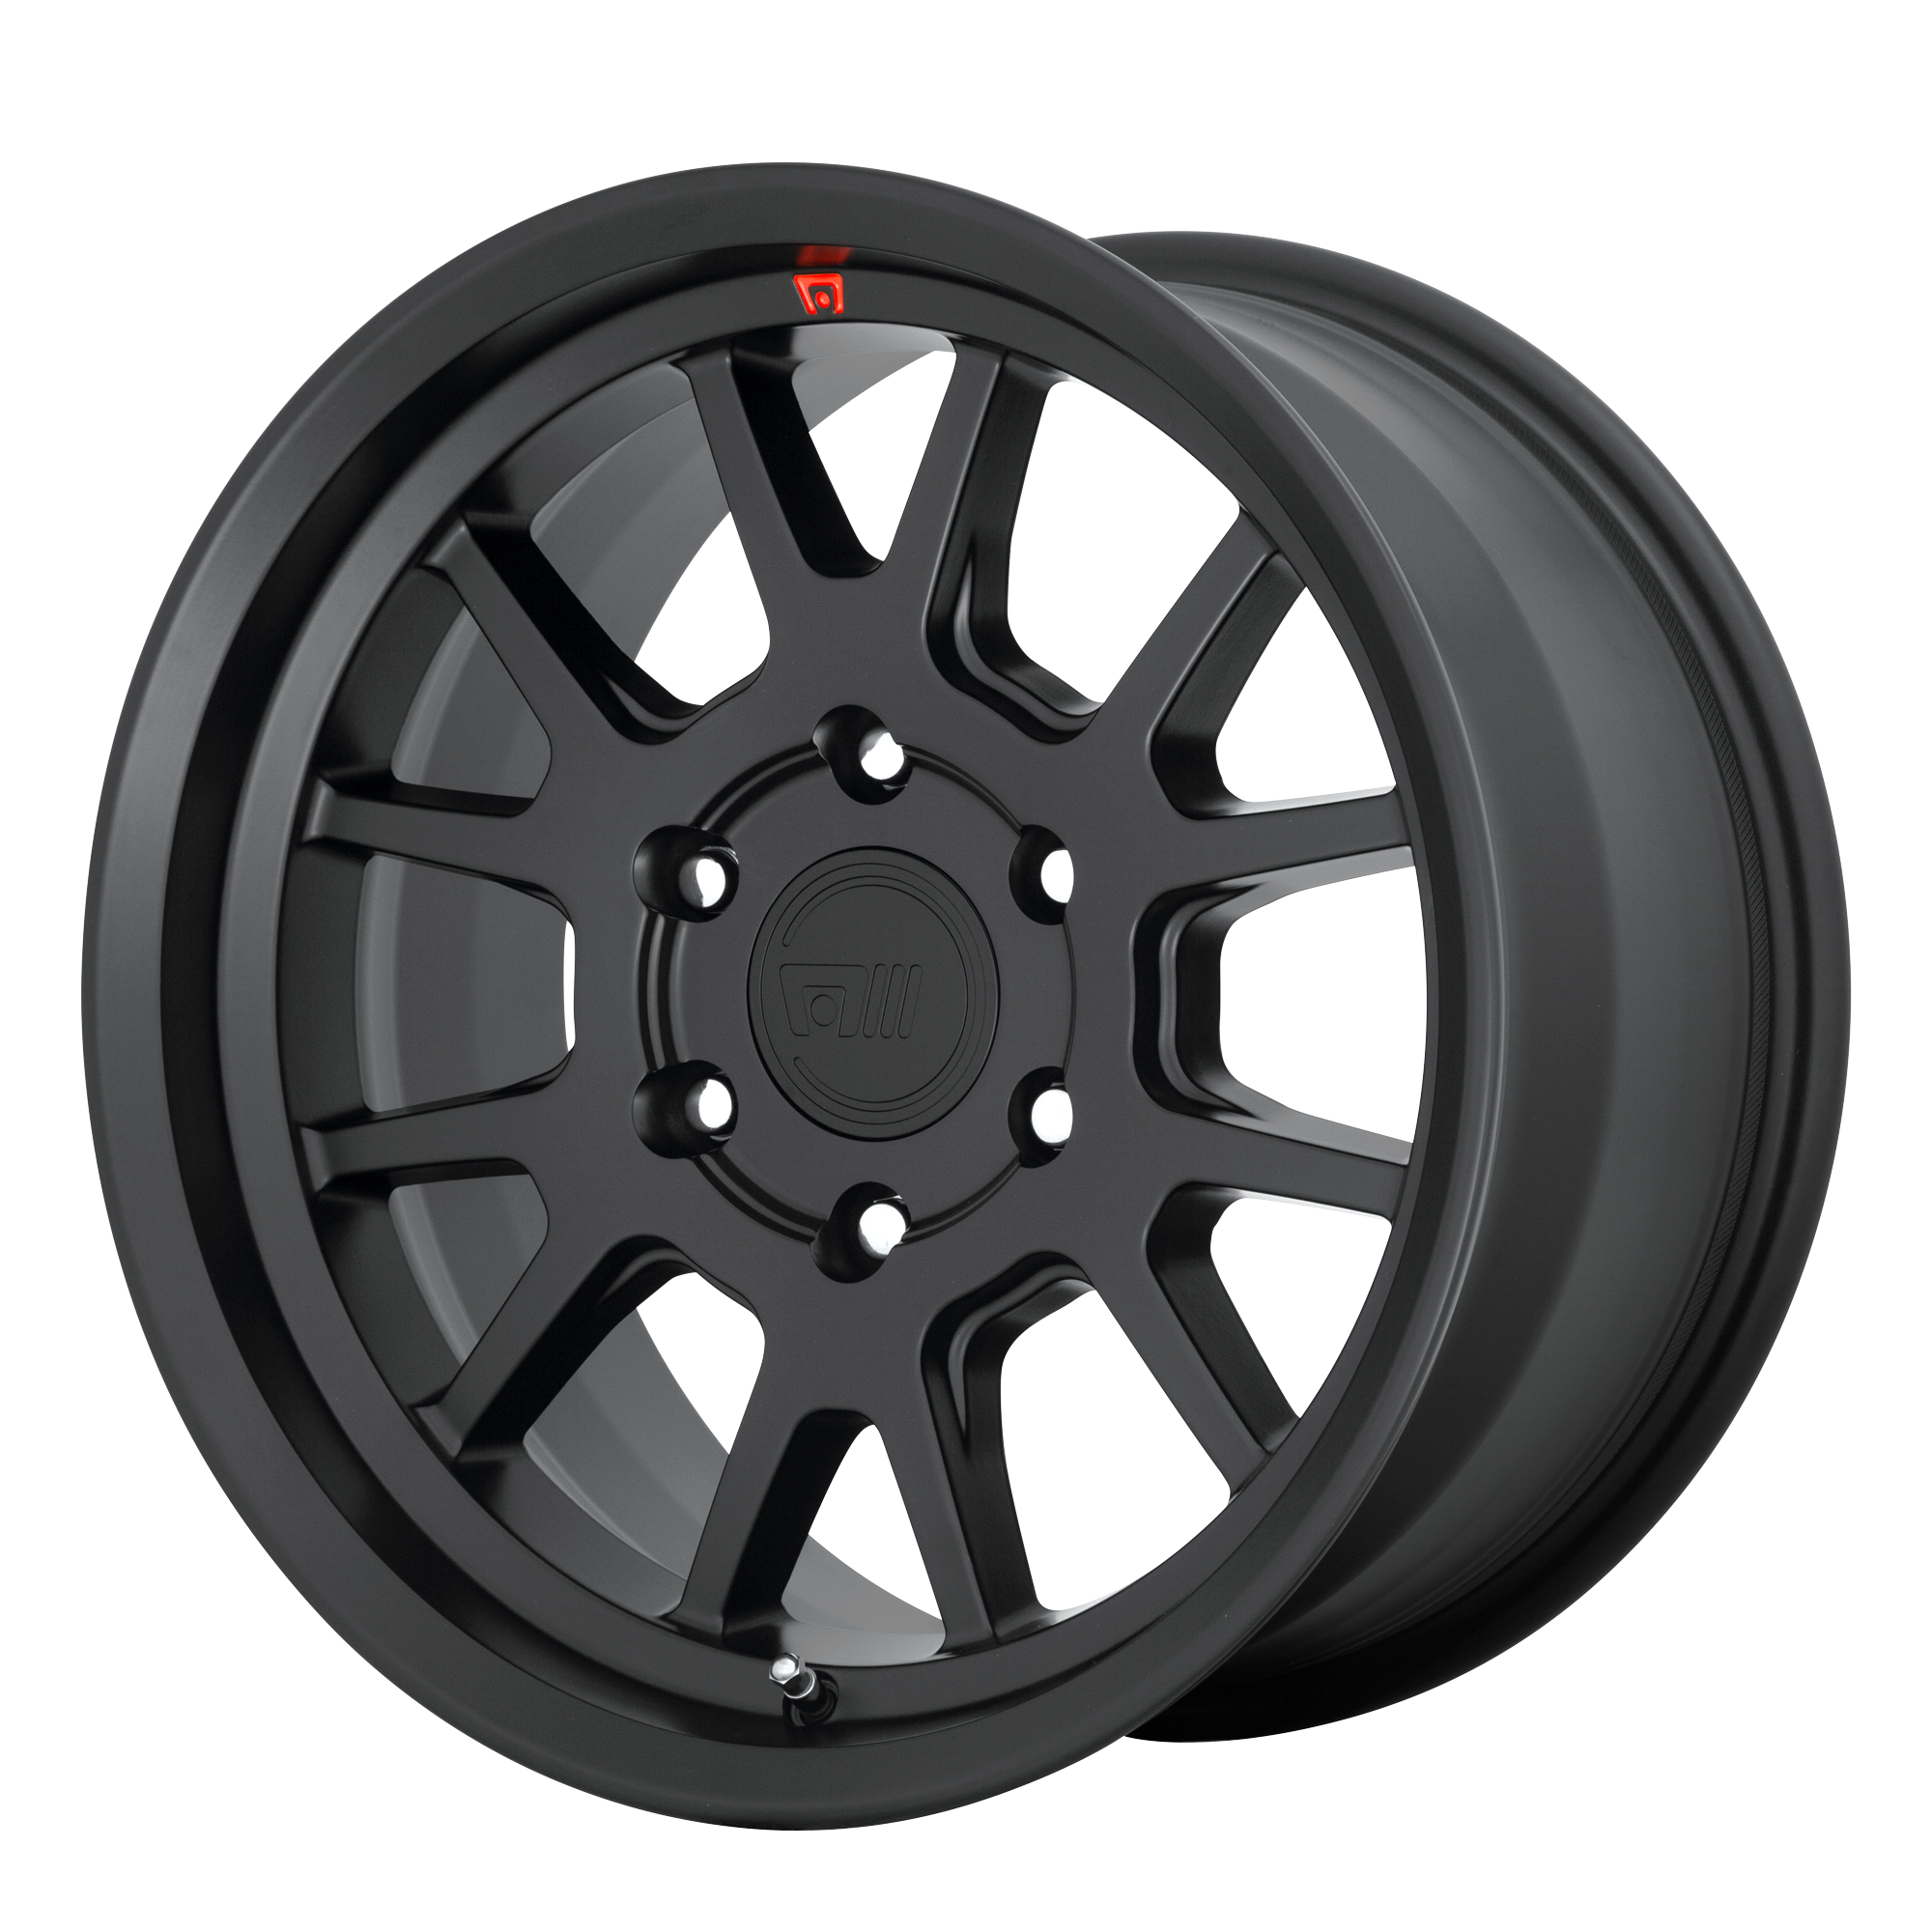 MT6 17x8.5 5x150.00 SATIN BLACK (0 mm) - Tires and Engine Performance